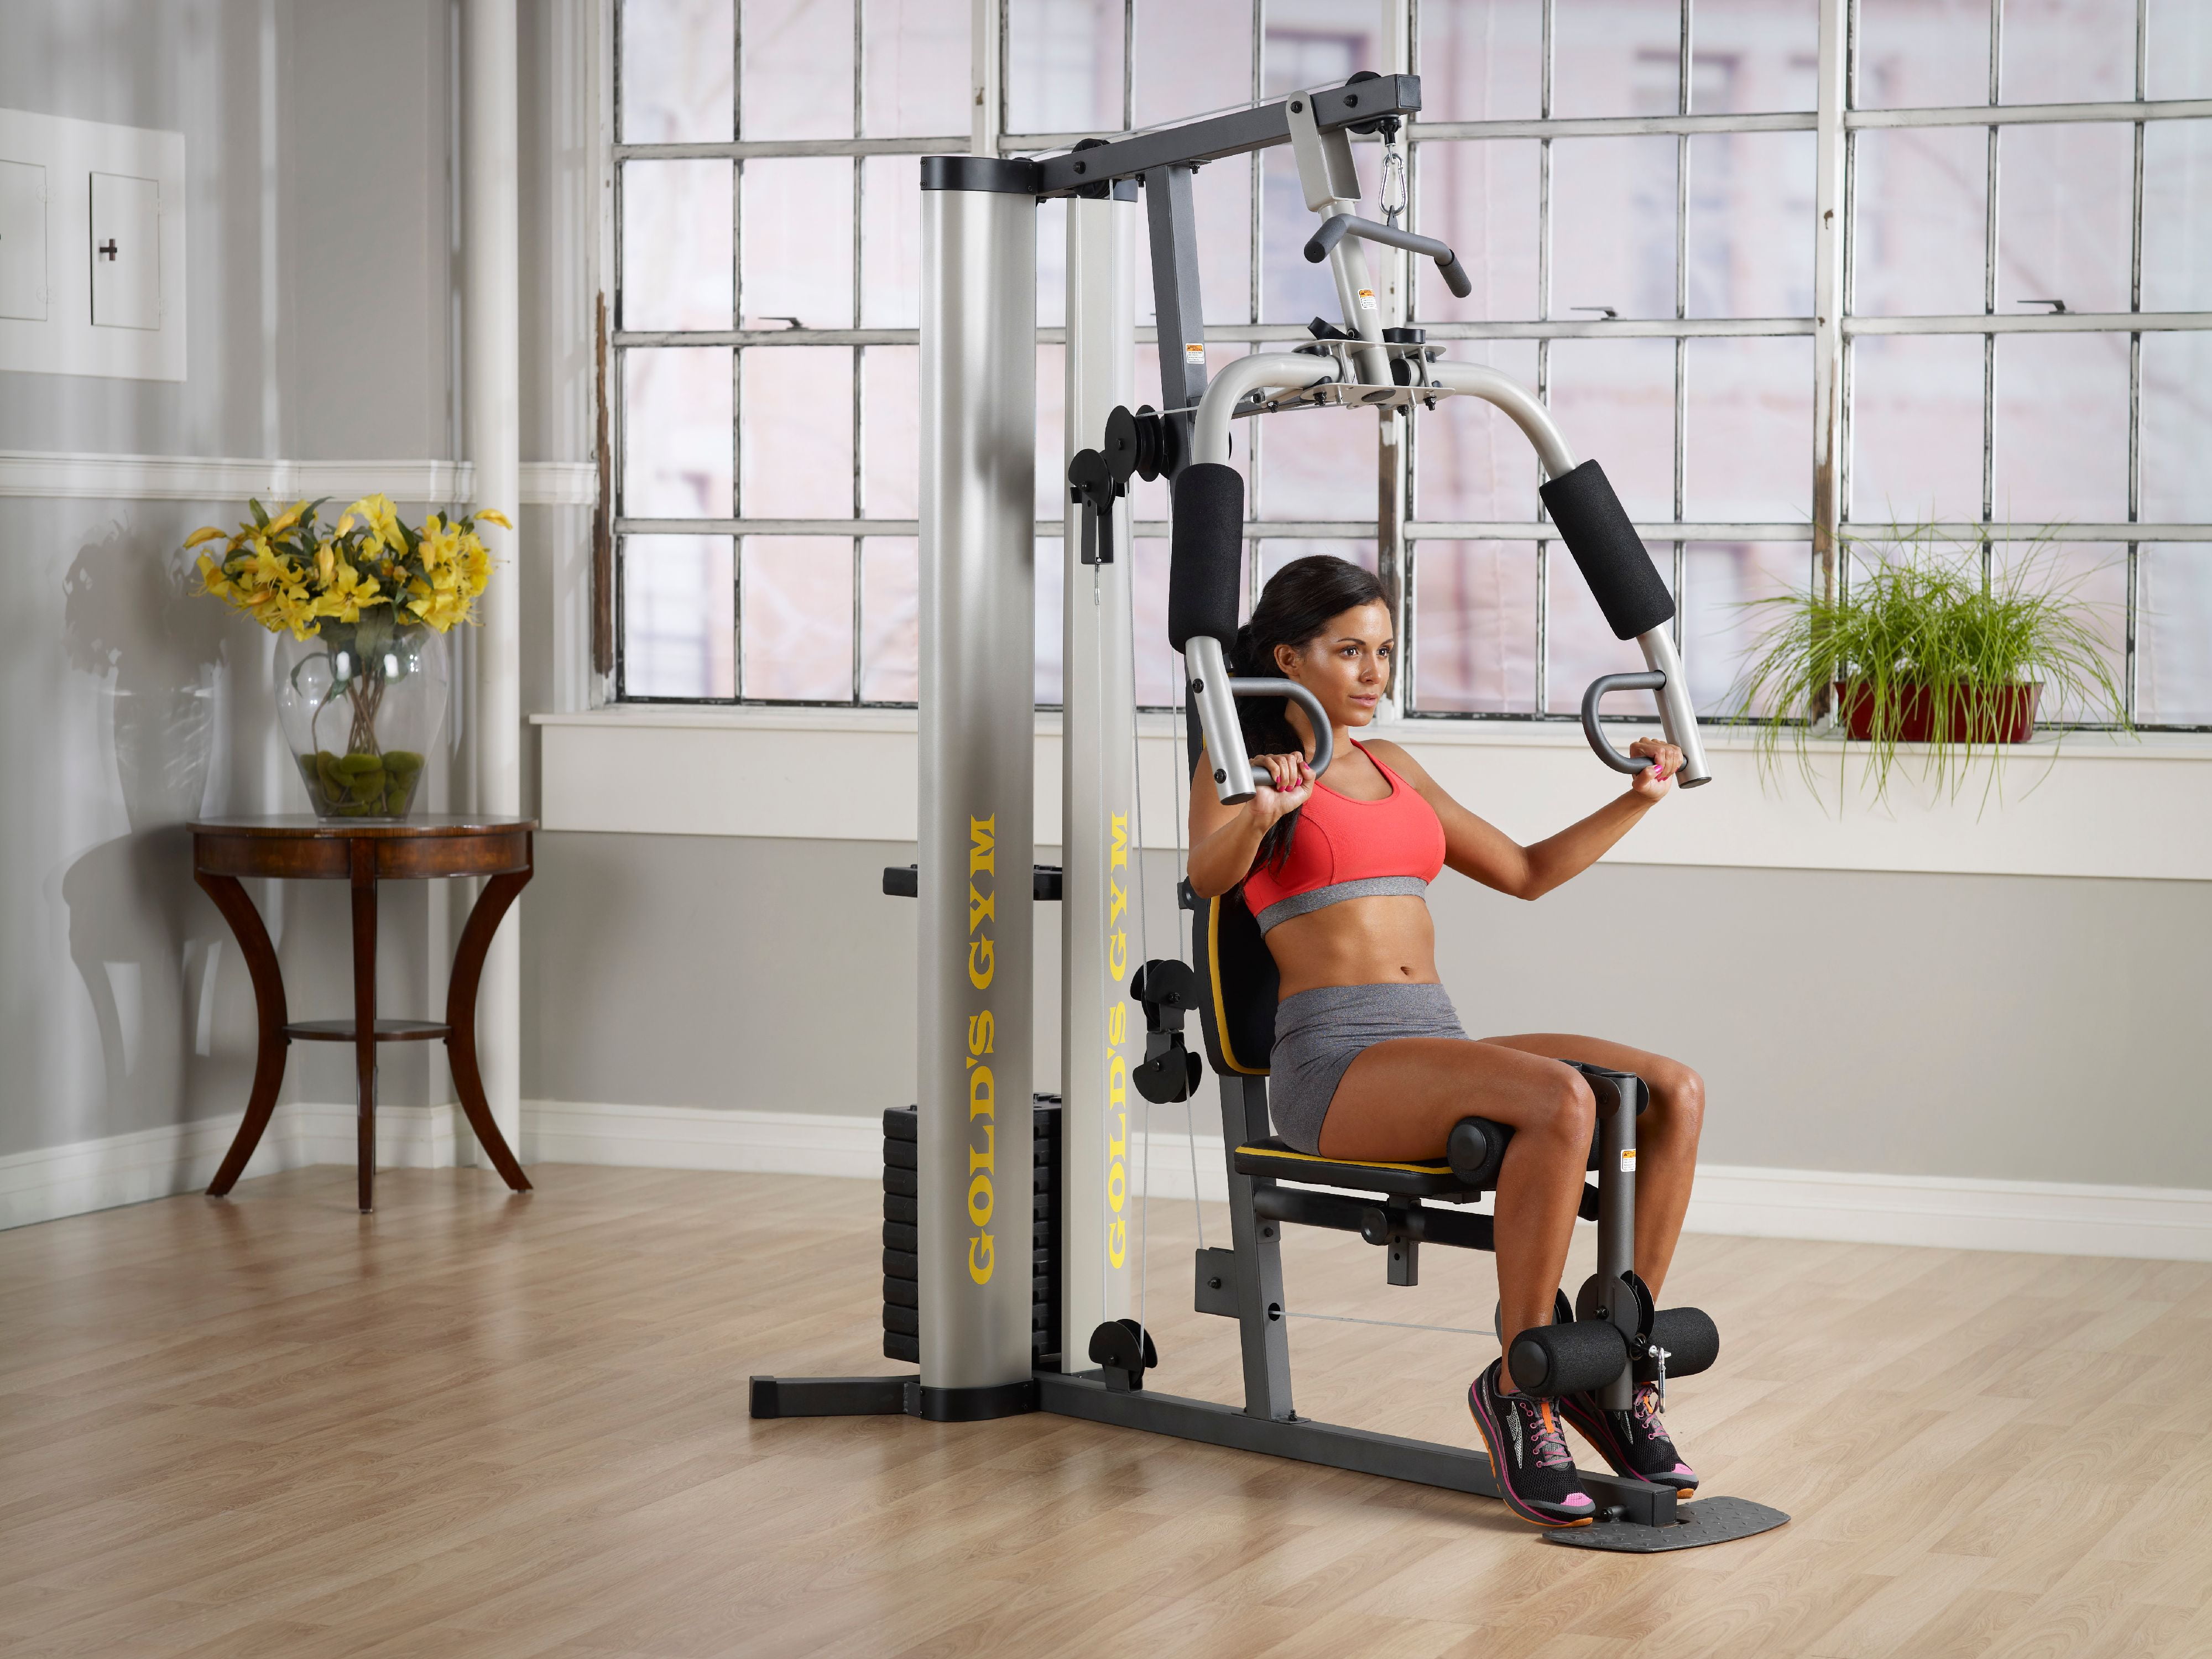 Gold's Gym XR 55 Home Gym with 330 Lbs of Resistance